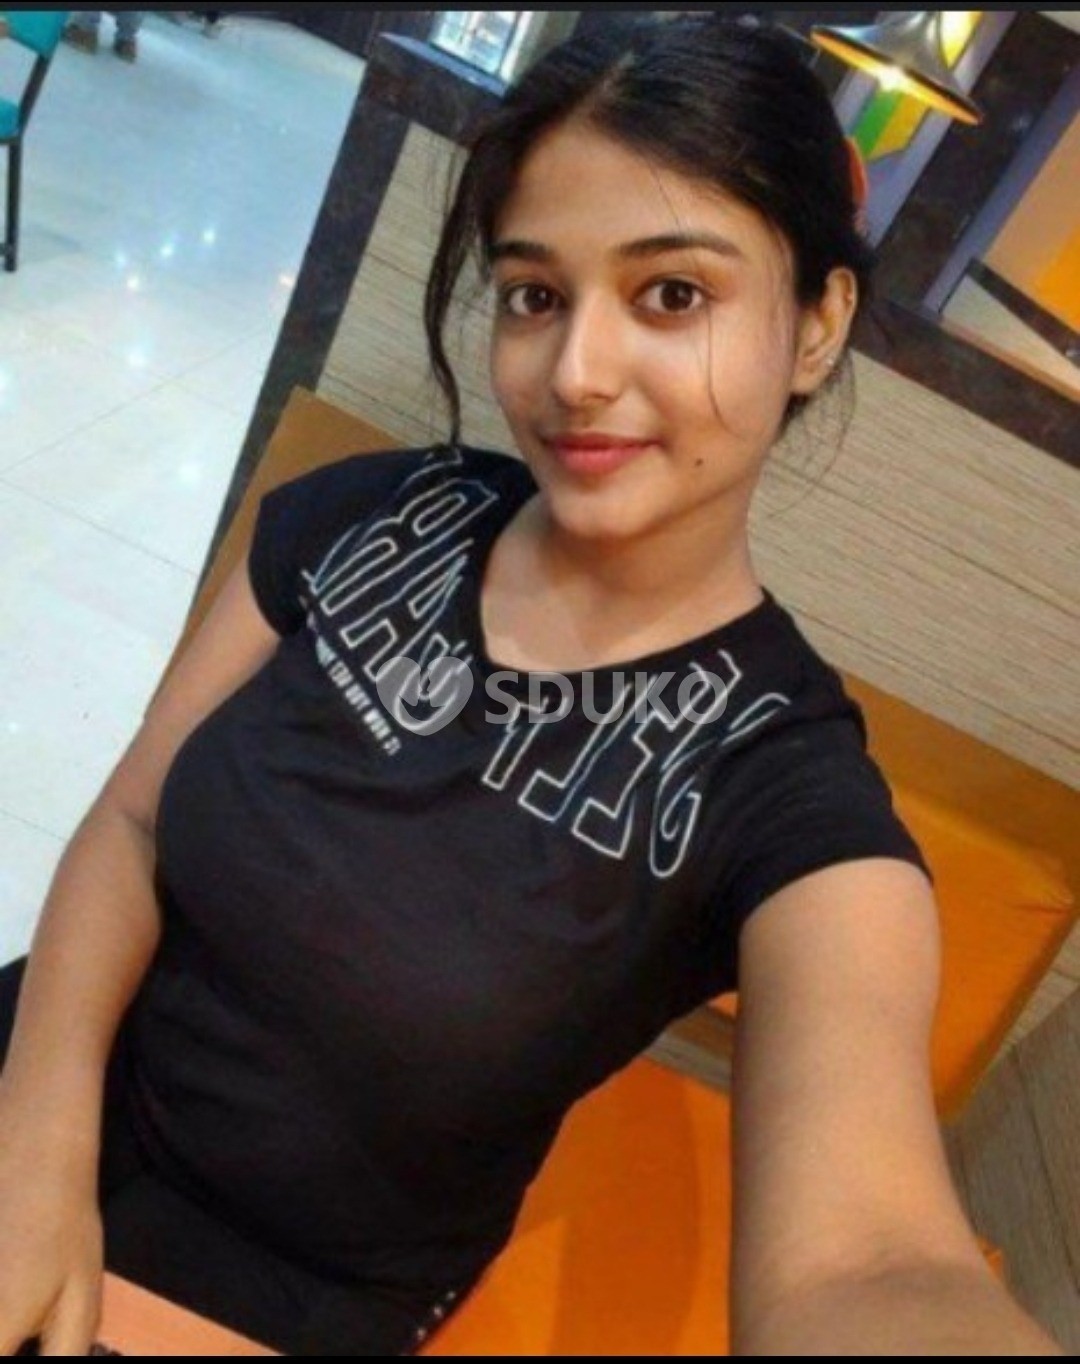 Tirupati v💙____MY SELF DIVYA UNLIMITED SEX CUTE BEST SERVICE AND 24 HR AVAILABLE.